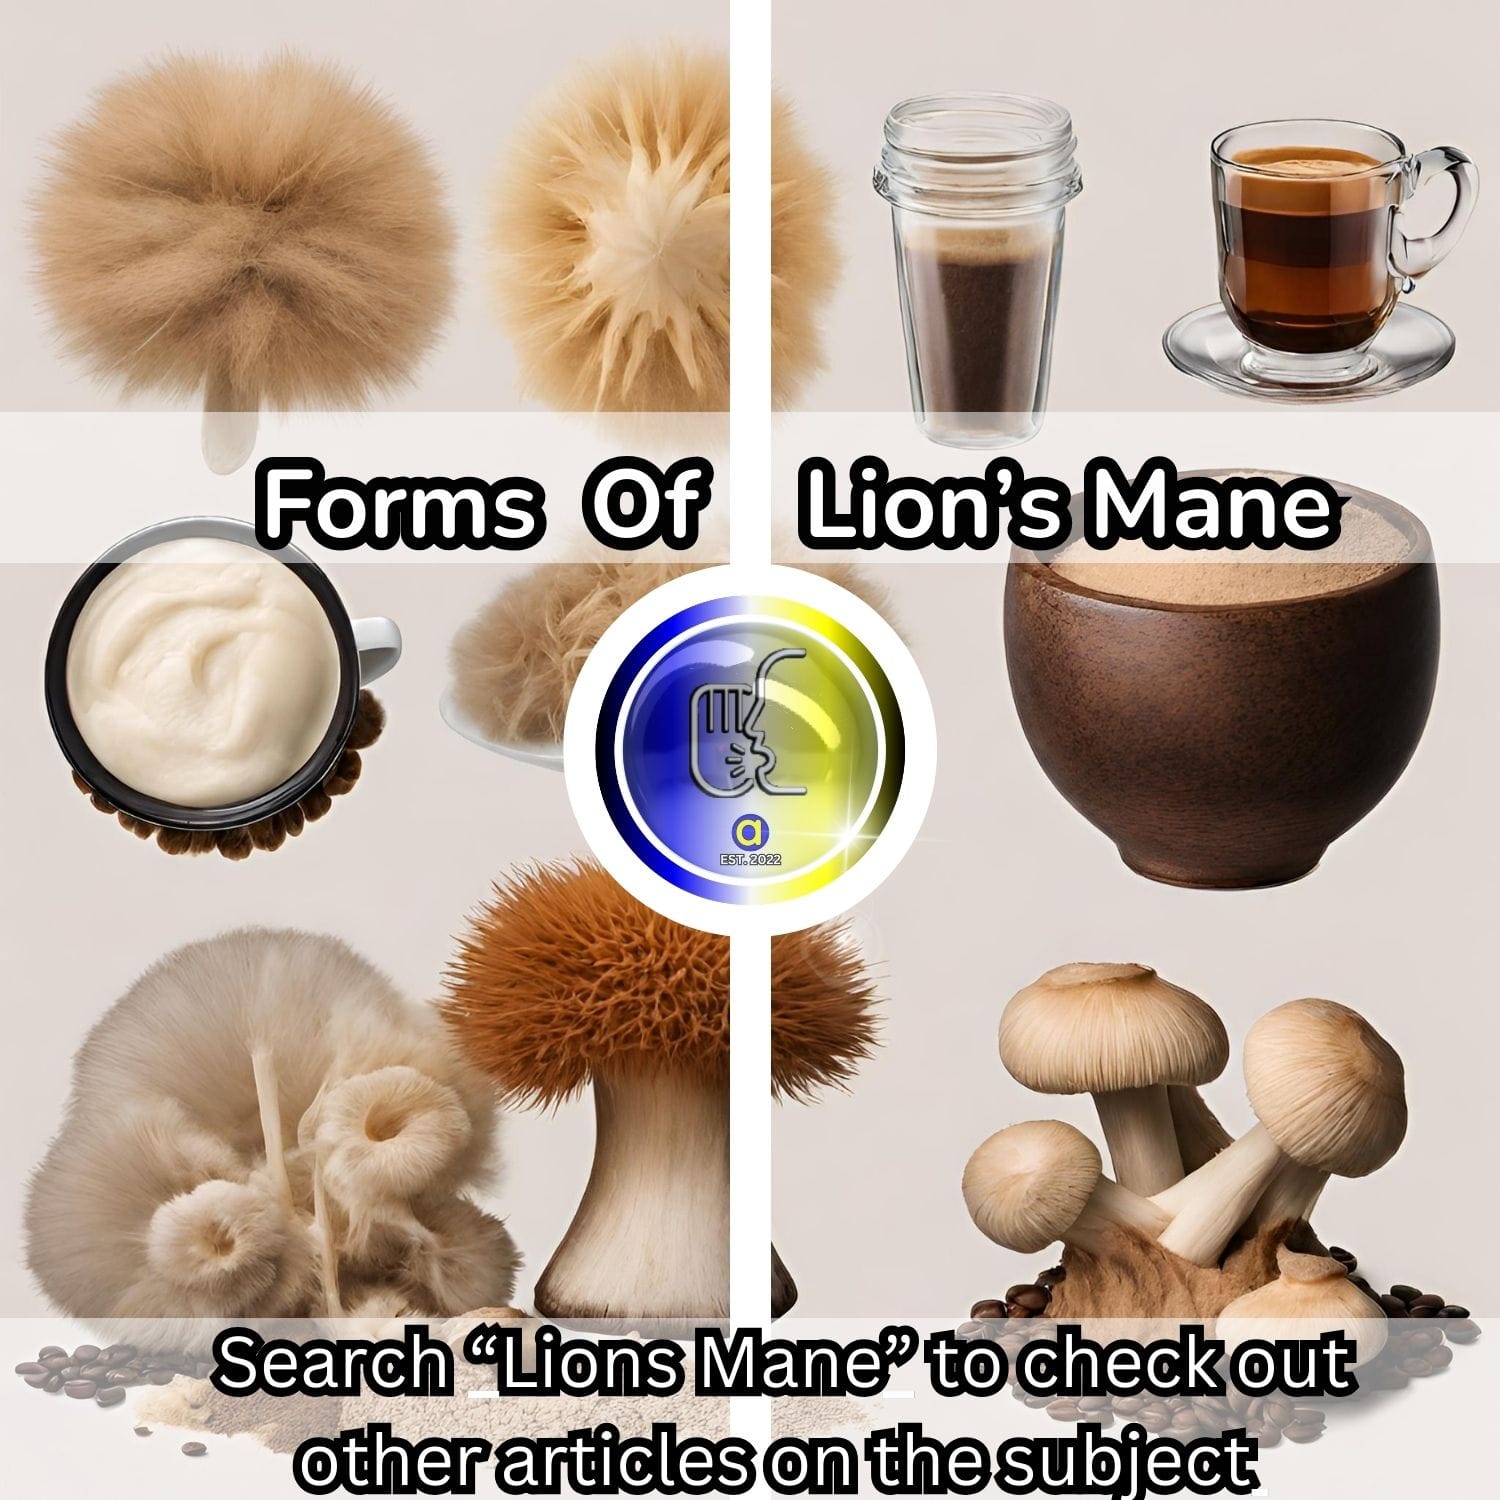 What is the Best Form of Lion's Mane for Optimal Brain Health